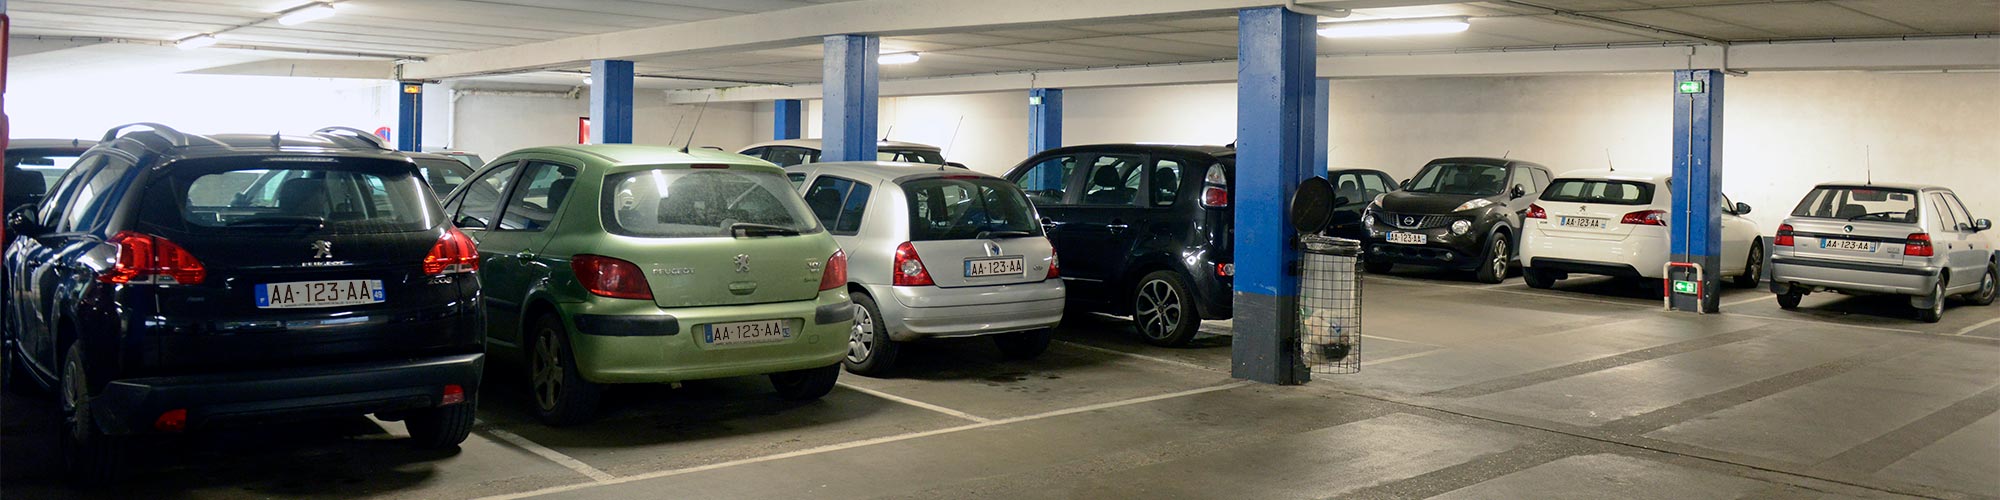 Parking Bressigny Angers